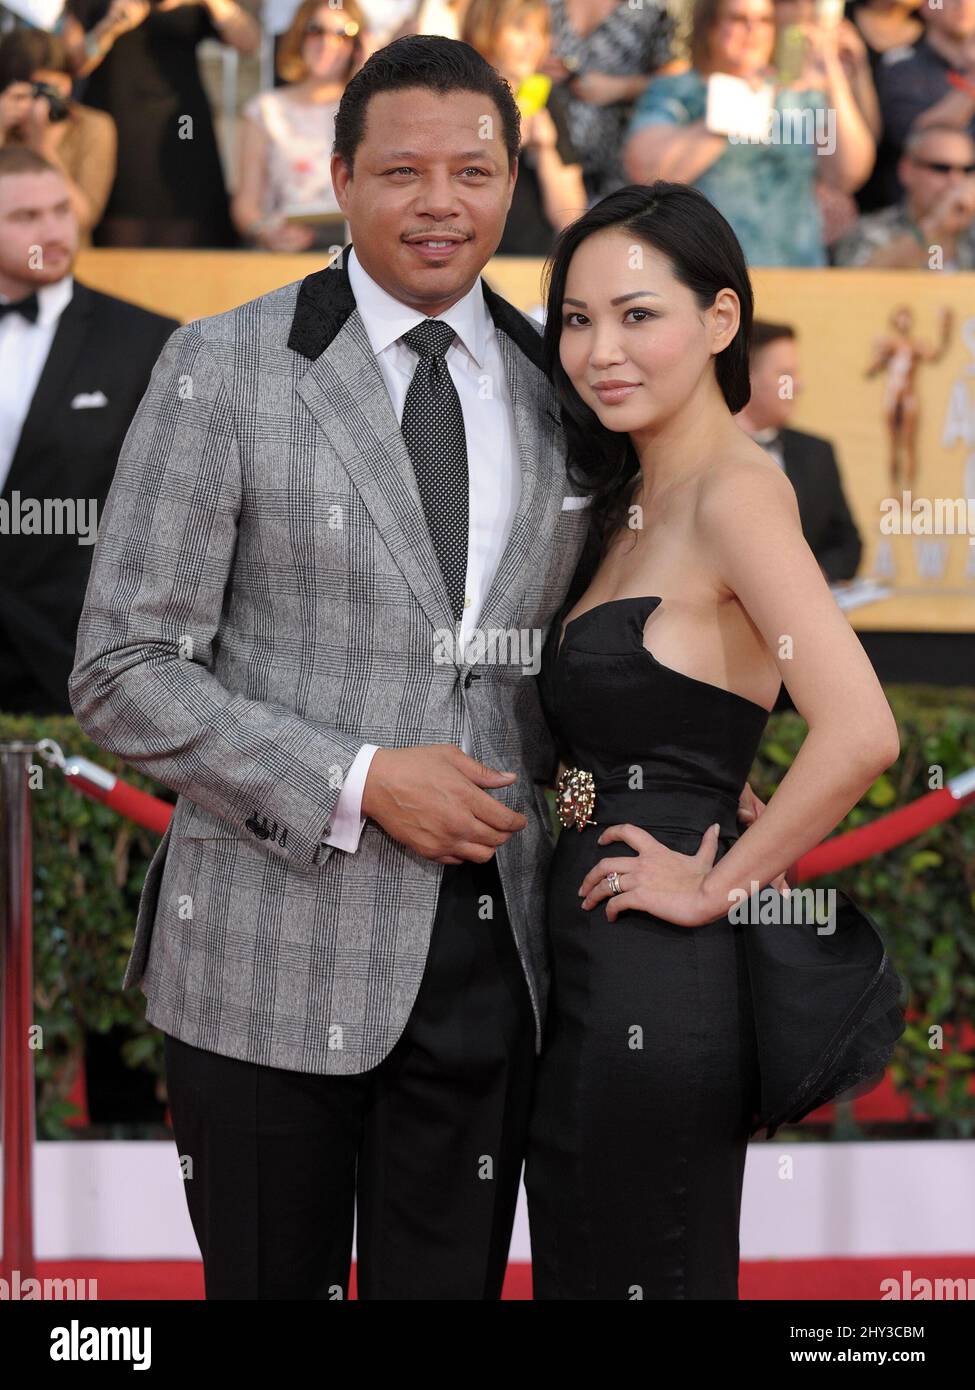 Terrance Howard attends the 20th Annual SAG Awards at Shrine Auditorium, Los Angeles, California 18th January. Stock Photo